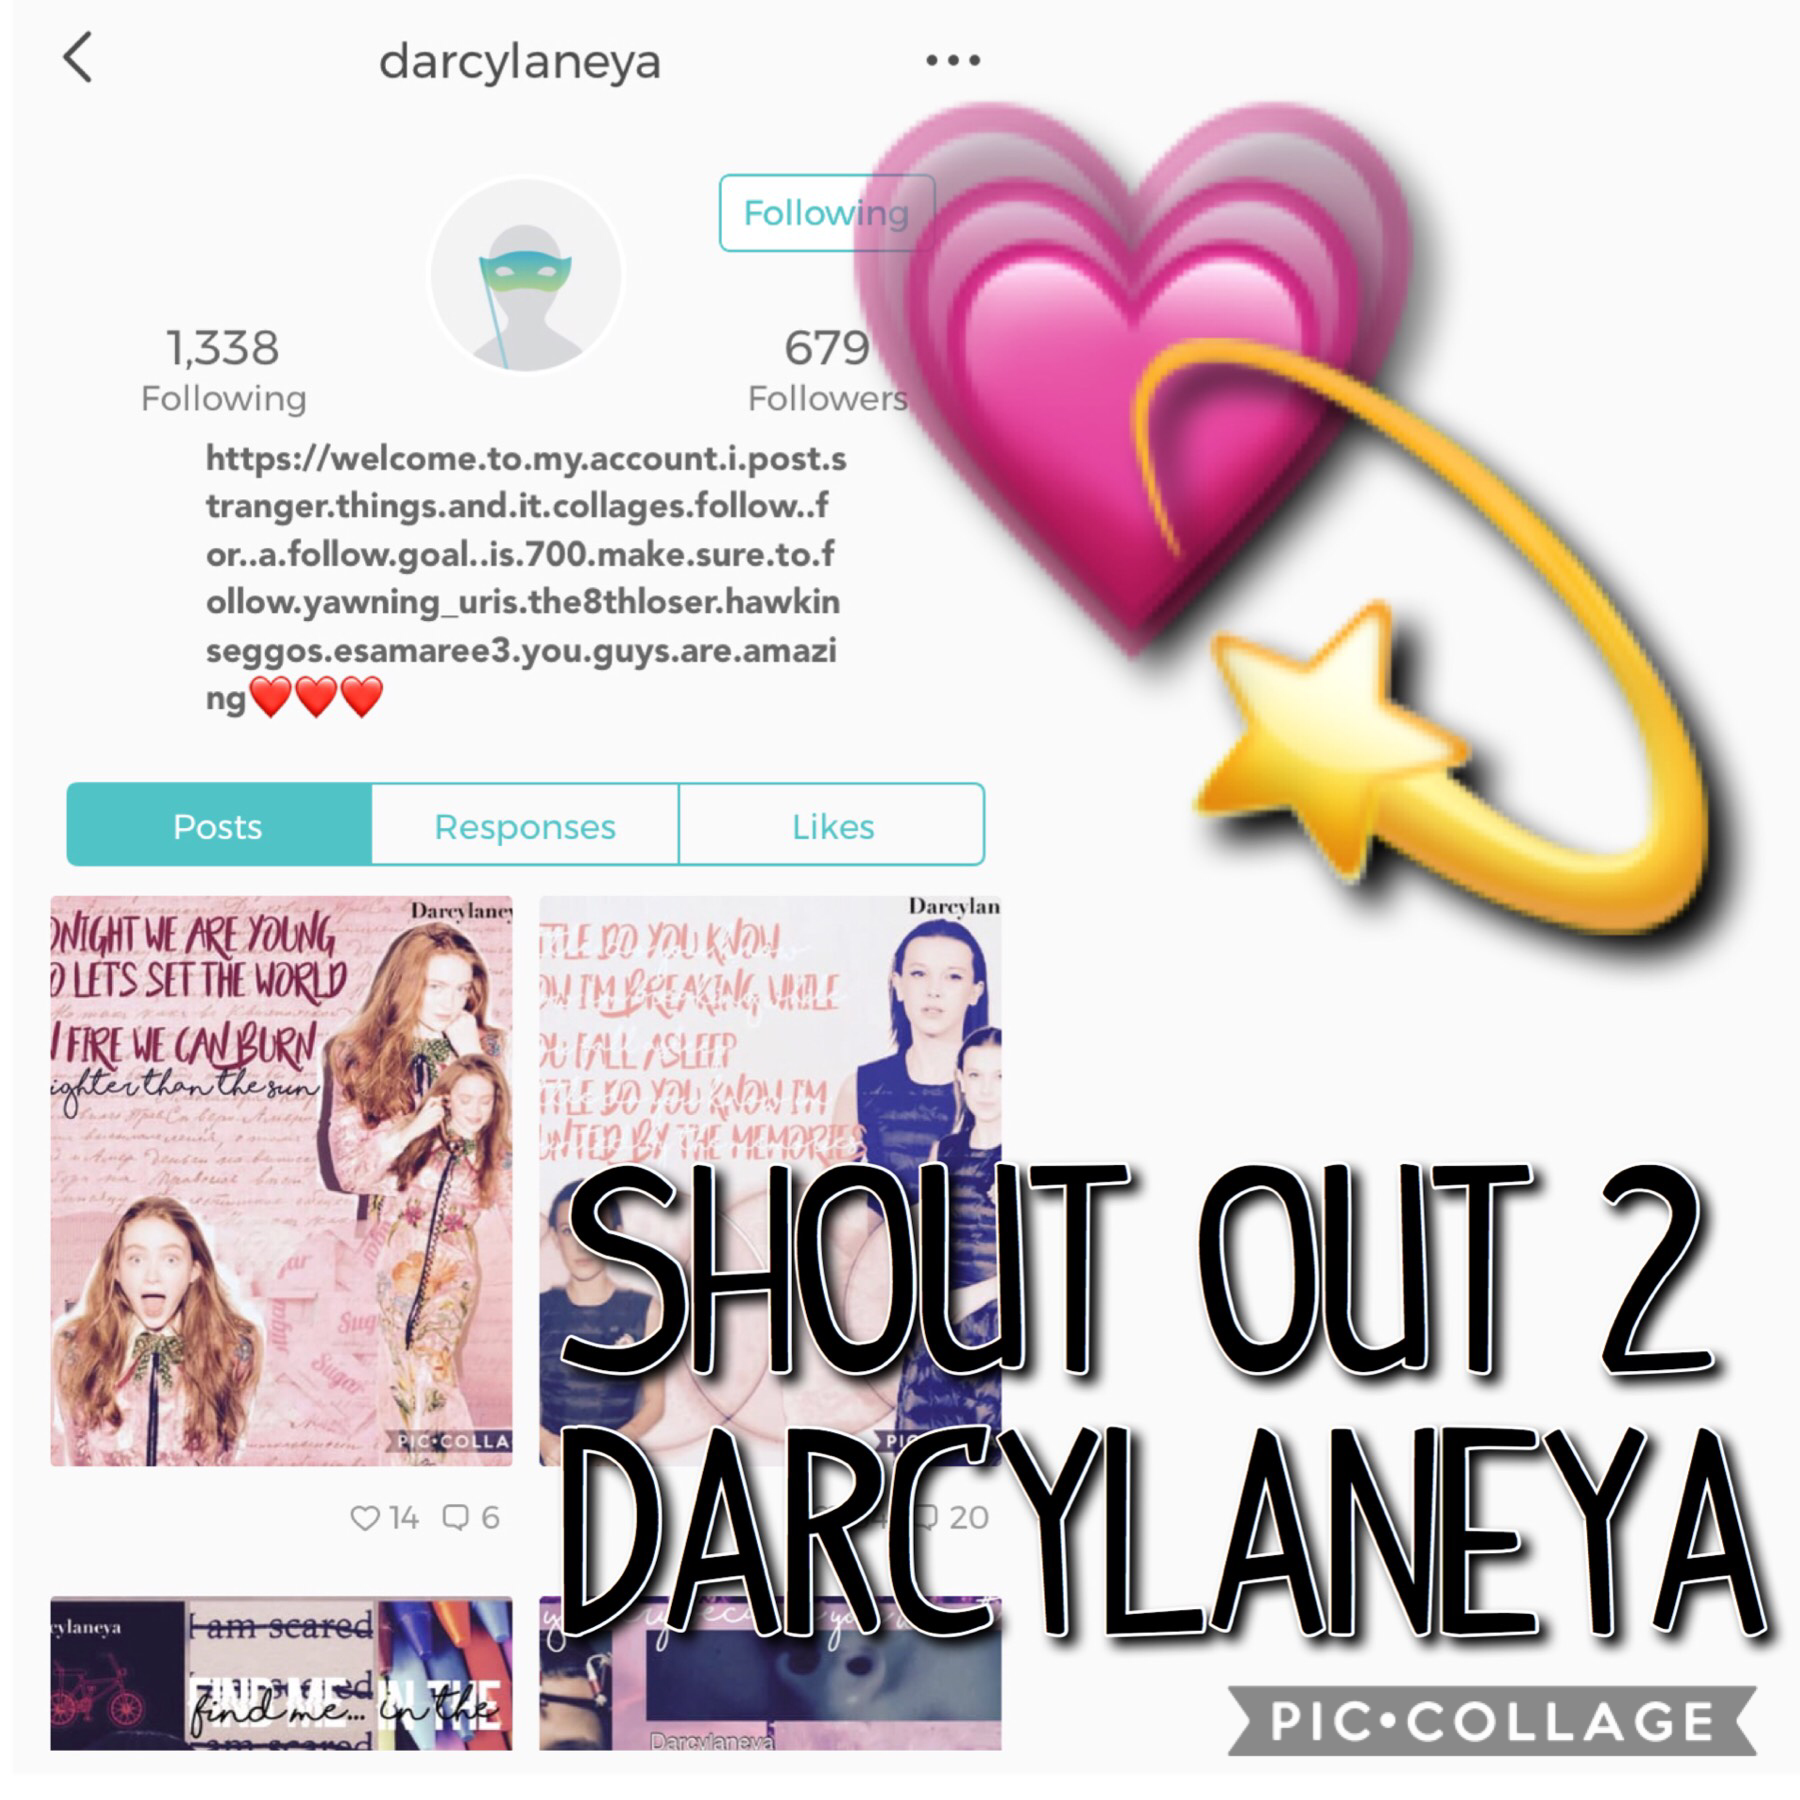 Shoutout to Darcy thank you for liking. Luv you girl💗💗